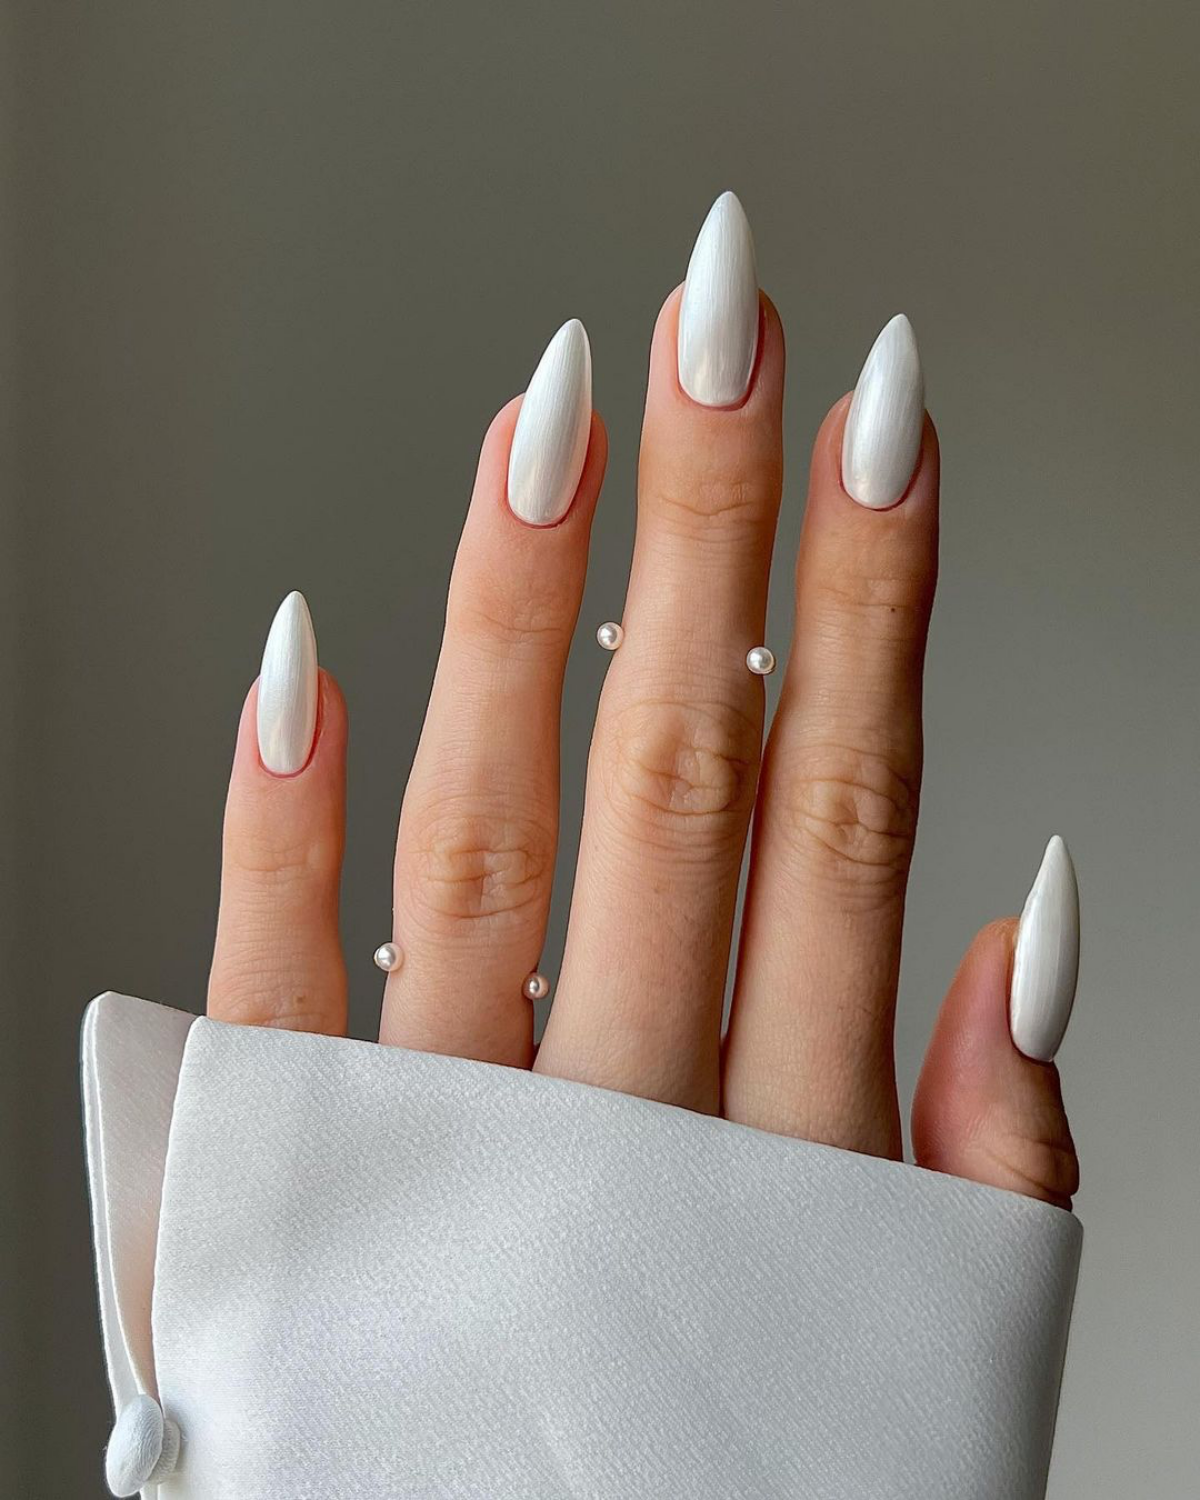 Elevate Your Nail Game With These Stunning Chrome White Nails